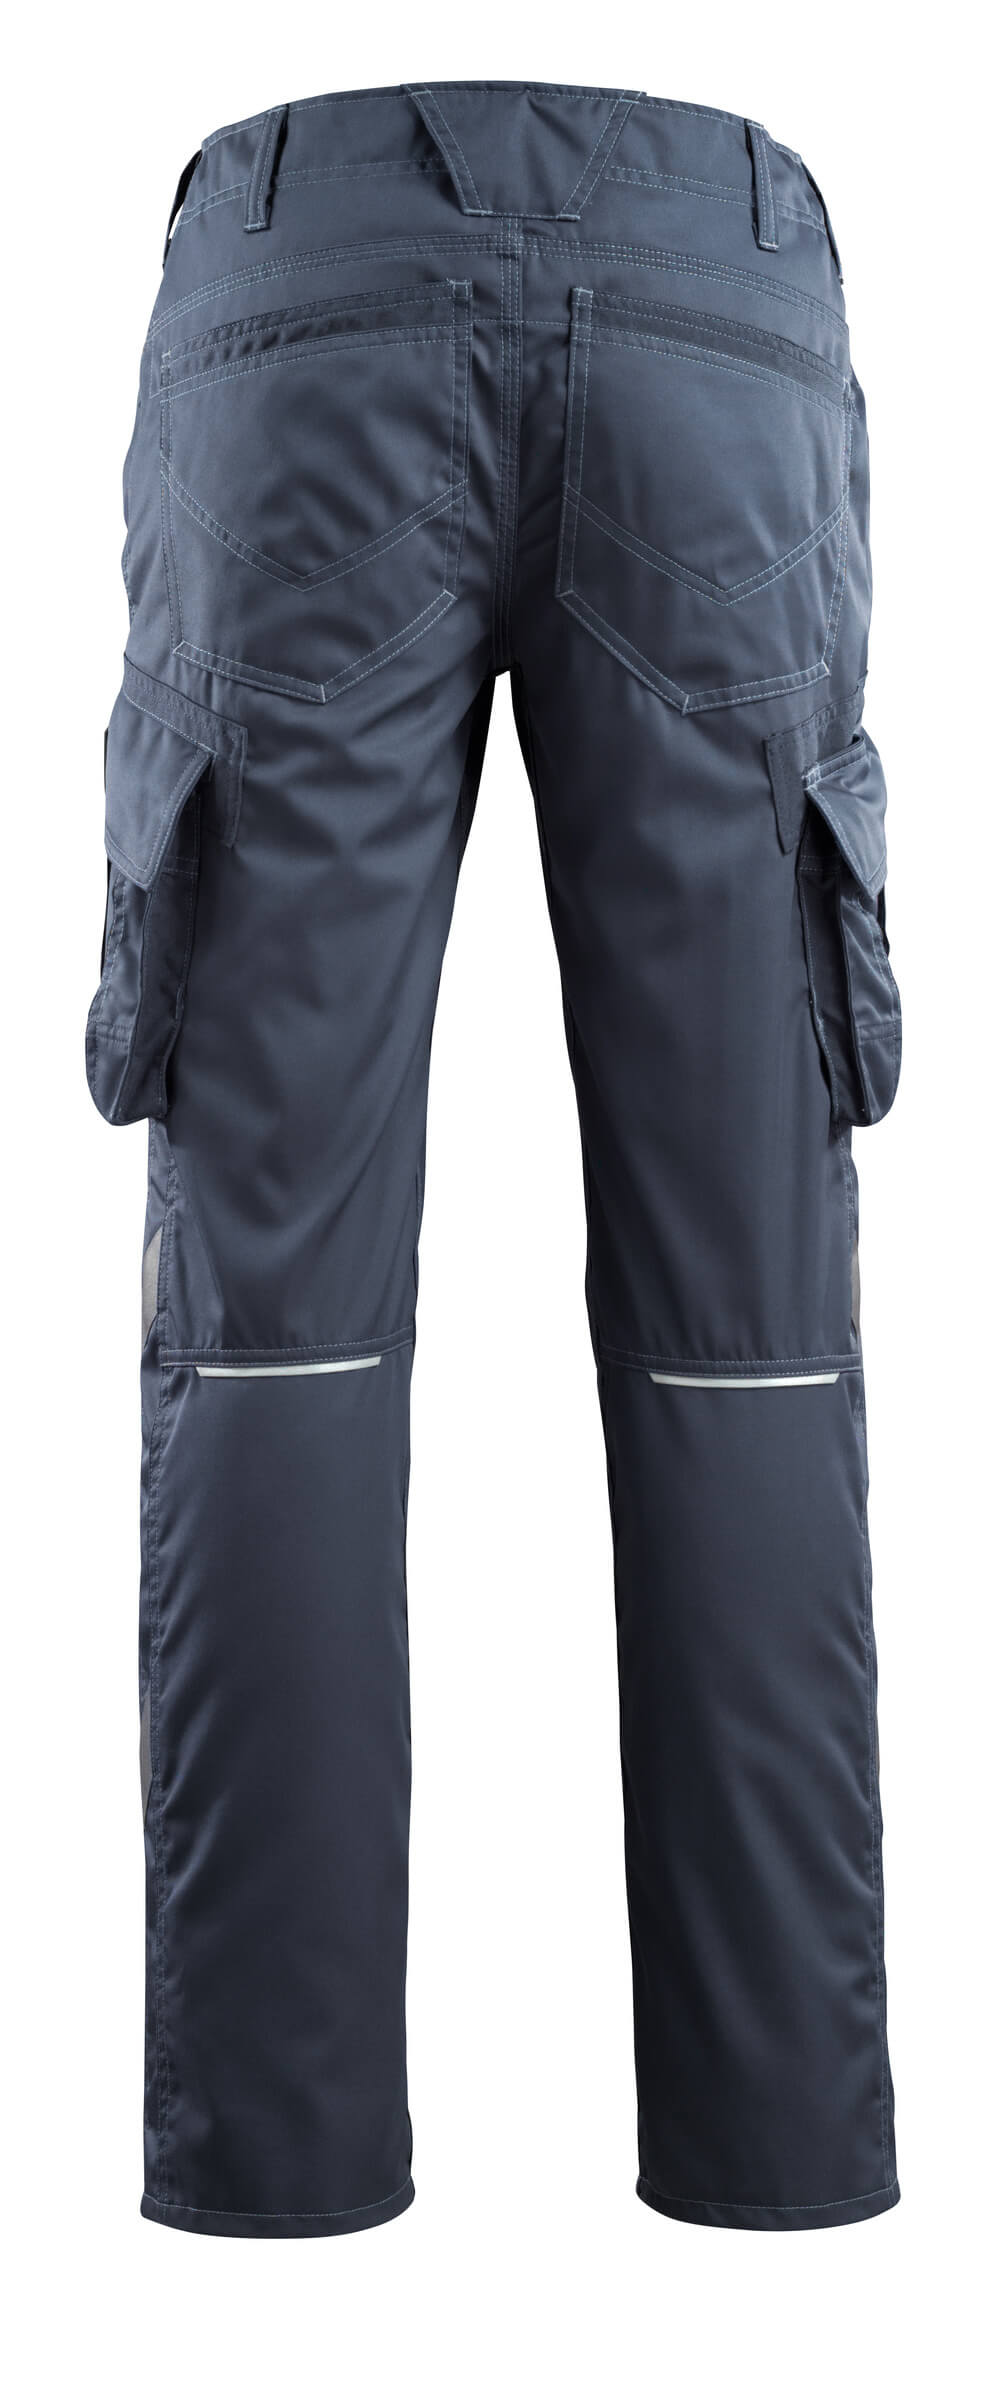 Mascot UNIQUE  Ingolstadt Trousers with thigh pockets 16179 dark navy